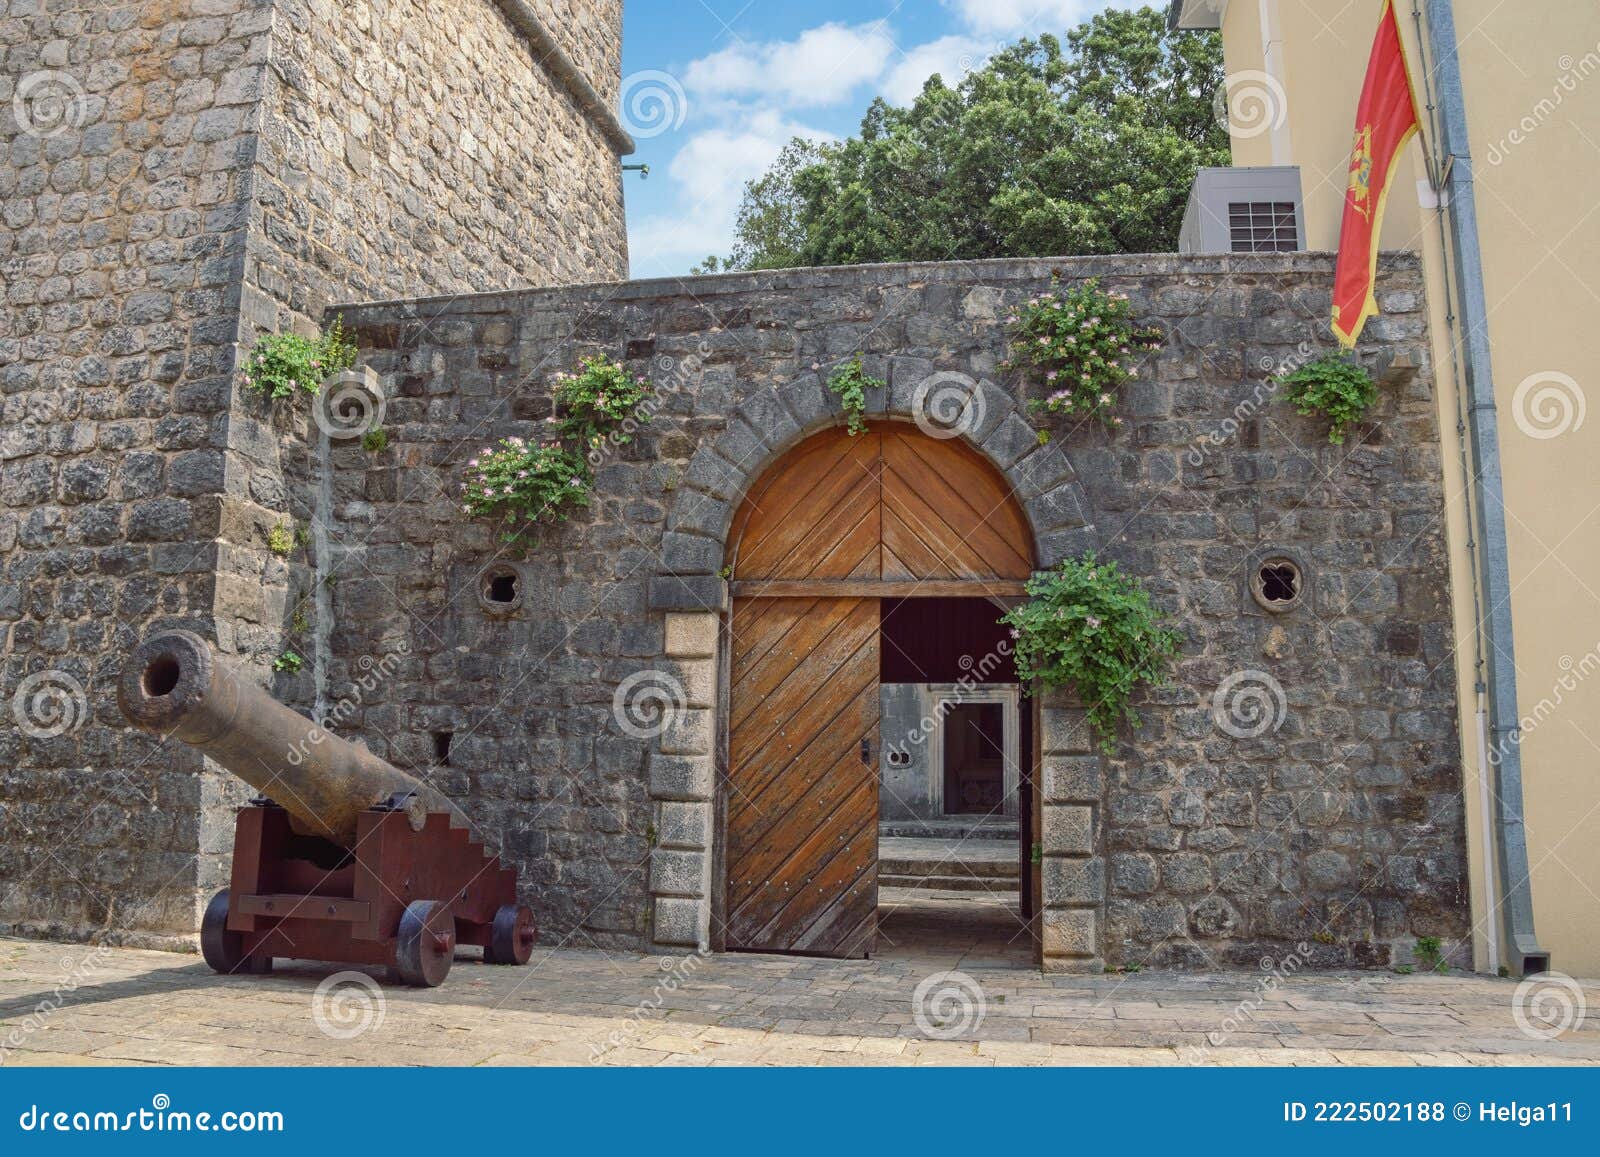 montenegro, tivat city. medieval summer house of the buca family.  entrance door